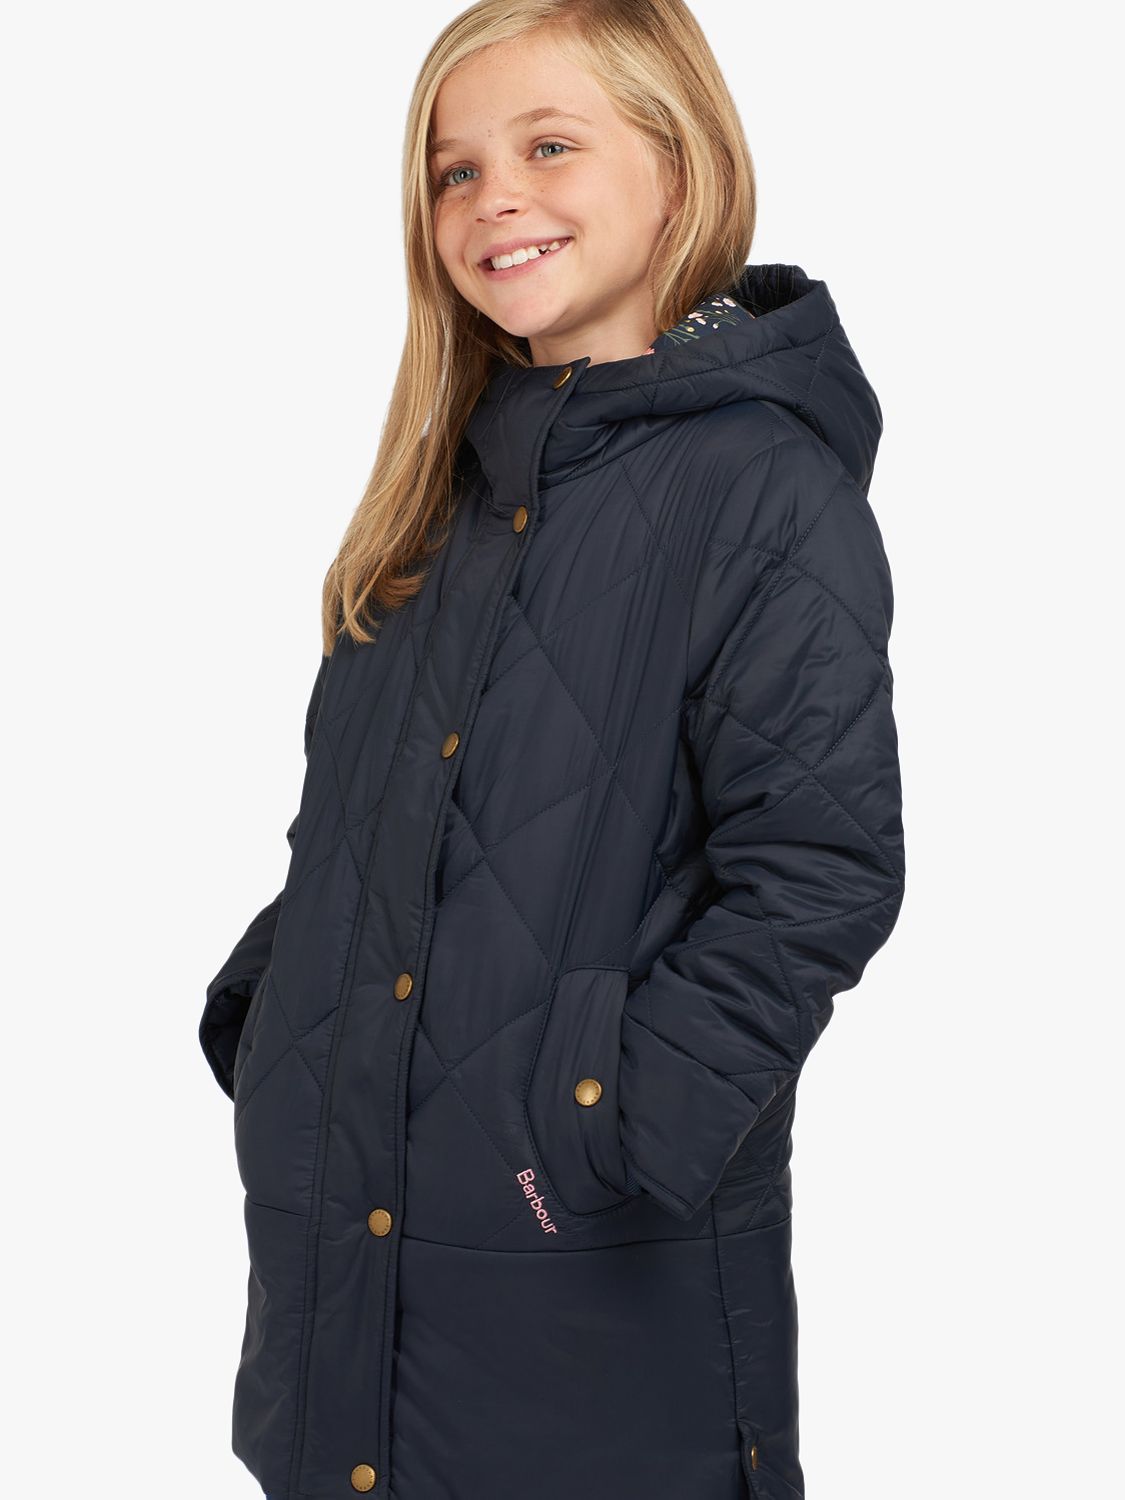 Barbour Kids' Tynemouth Quilted Jacket, Navy